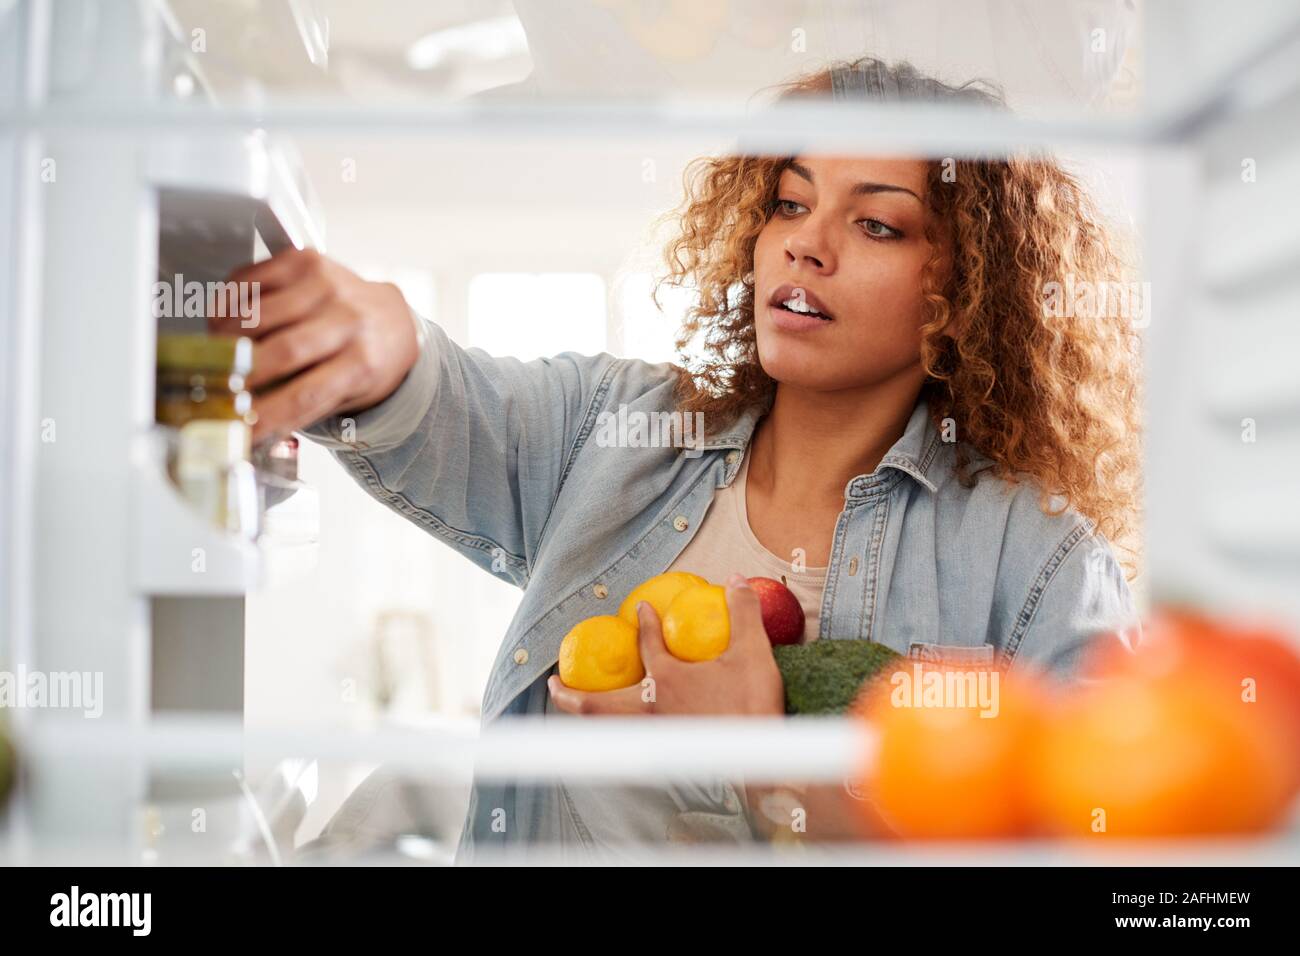 View Looking Out From Inside Of Refrigerator As Woman Opens Door And Packs Food Onto Shelves Stock Photo